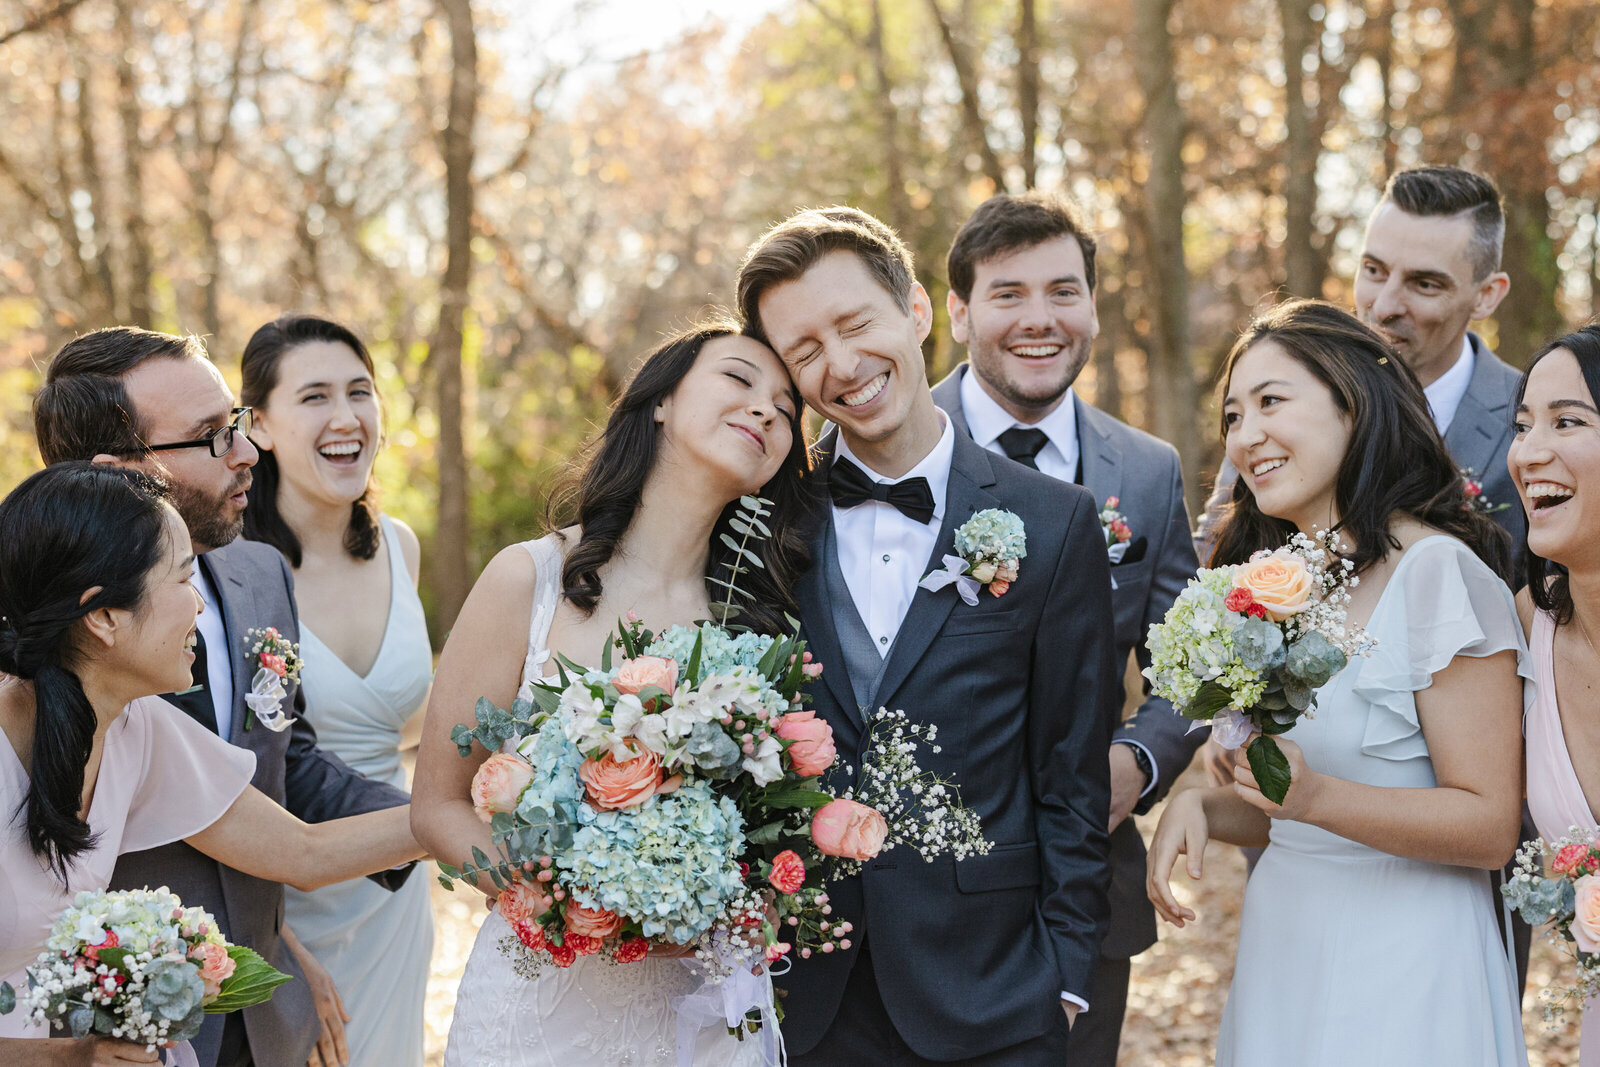 A candid portrait of a bride, groom, and their wedding party before their wedding ceremony in DFW, Texas. The bride is in the center on the left and is leaning her face against the groom's face while holding a large, colorful bouquet. She is wearing a sleeveless, white, highly detailed white dress. The groom is right next to her and is smiling widely with closed eyes. He is wearing a three piece suit with a bowtie and boutonniere. The groomsmen are all wearing a grey suits with ties and boutonnieres while the bridesmaids are wearing dresses in shades of light pink and light blue while holding small, colorful bouquets. They are all backed by a large row of fall trees.